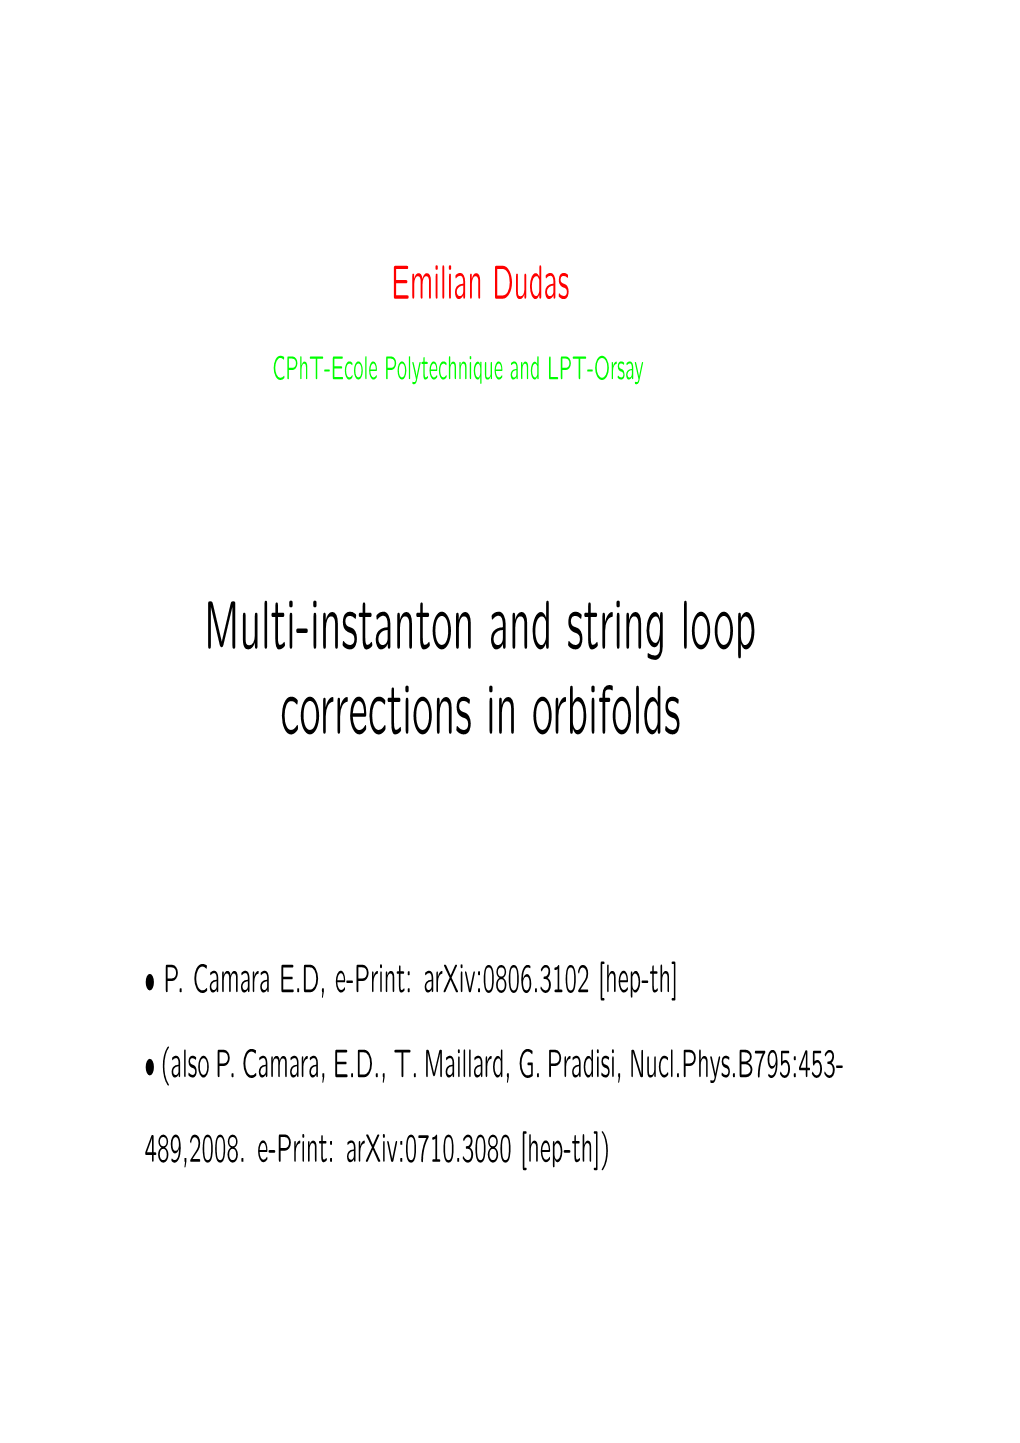 Multi-Instanton and String Loop Corrections in Orbifolds